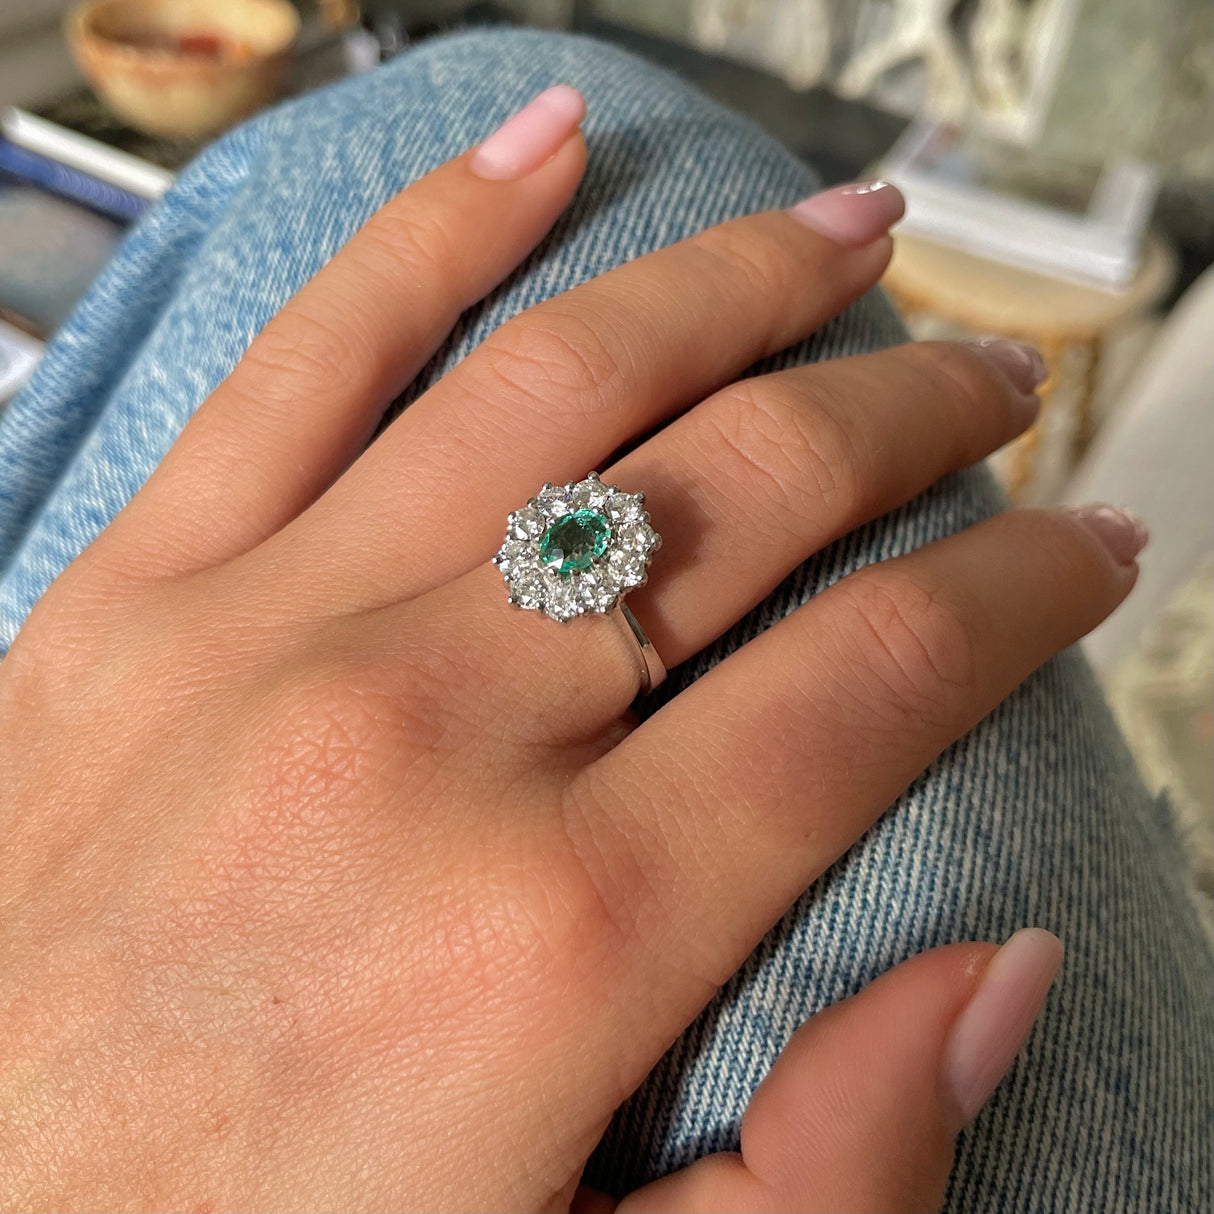 Austrian emerald and diamond cluster engagement ring, worn on hand.